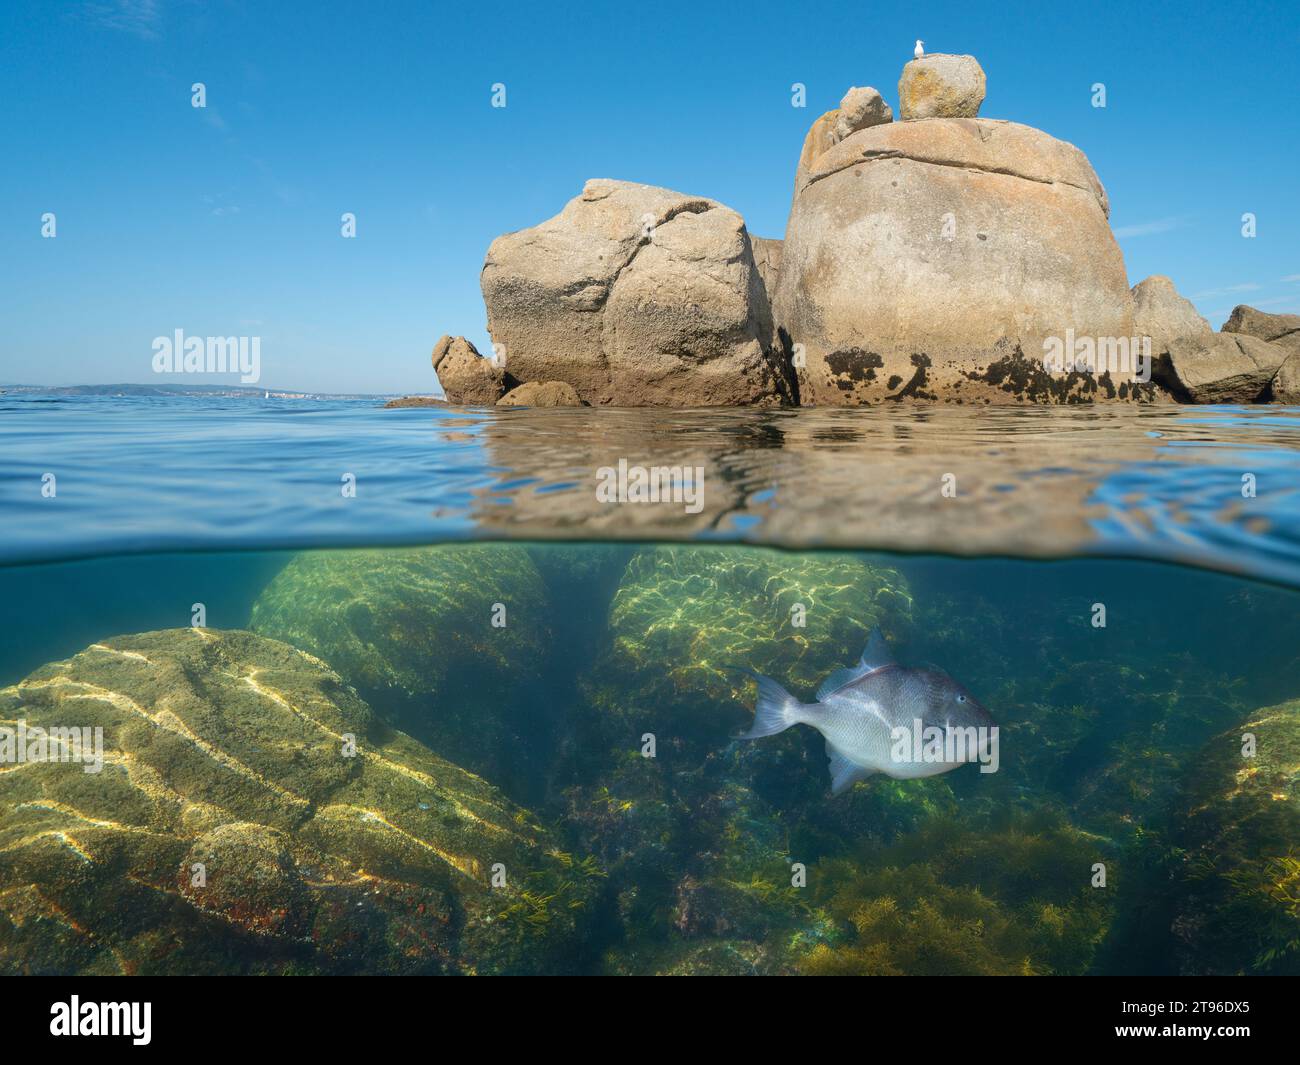 Boulders in the Atlantic ocean with a triggerfish underwater, natural scene, split view over and under water surface, Spain, Galicia, Rias Baixas Stock Photo